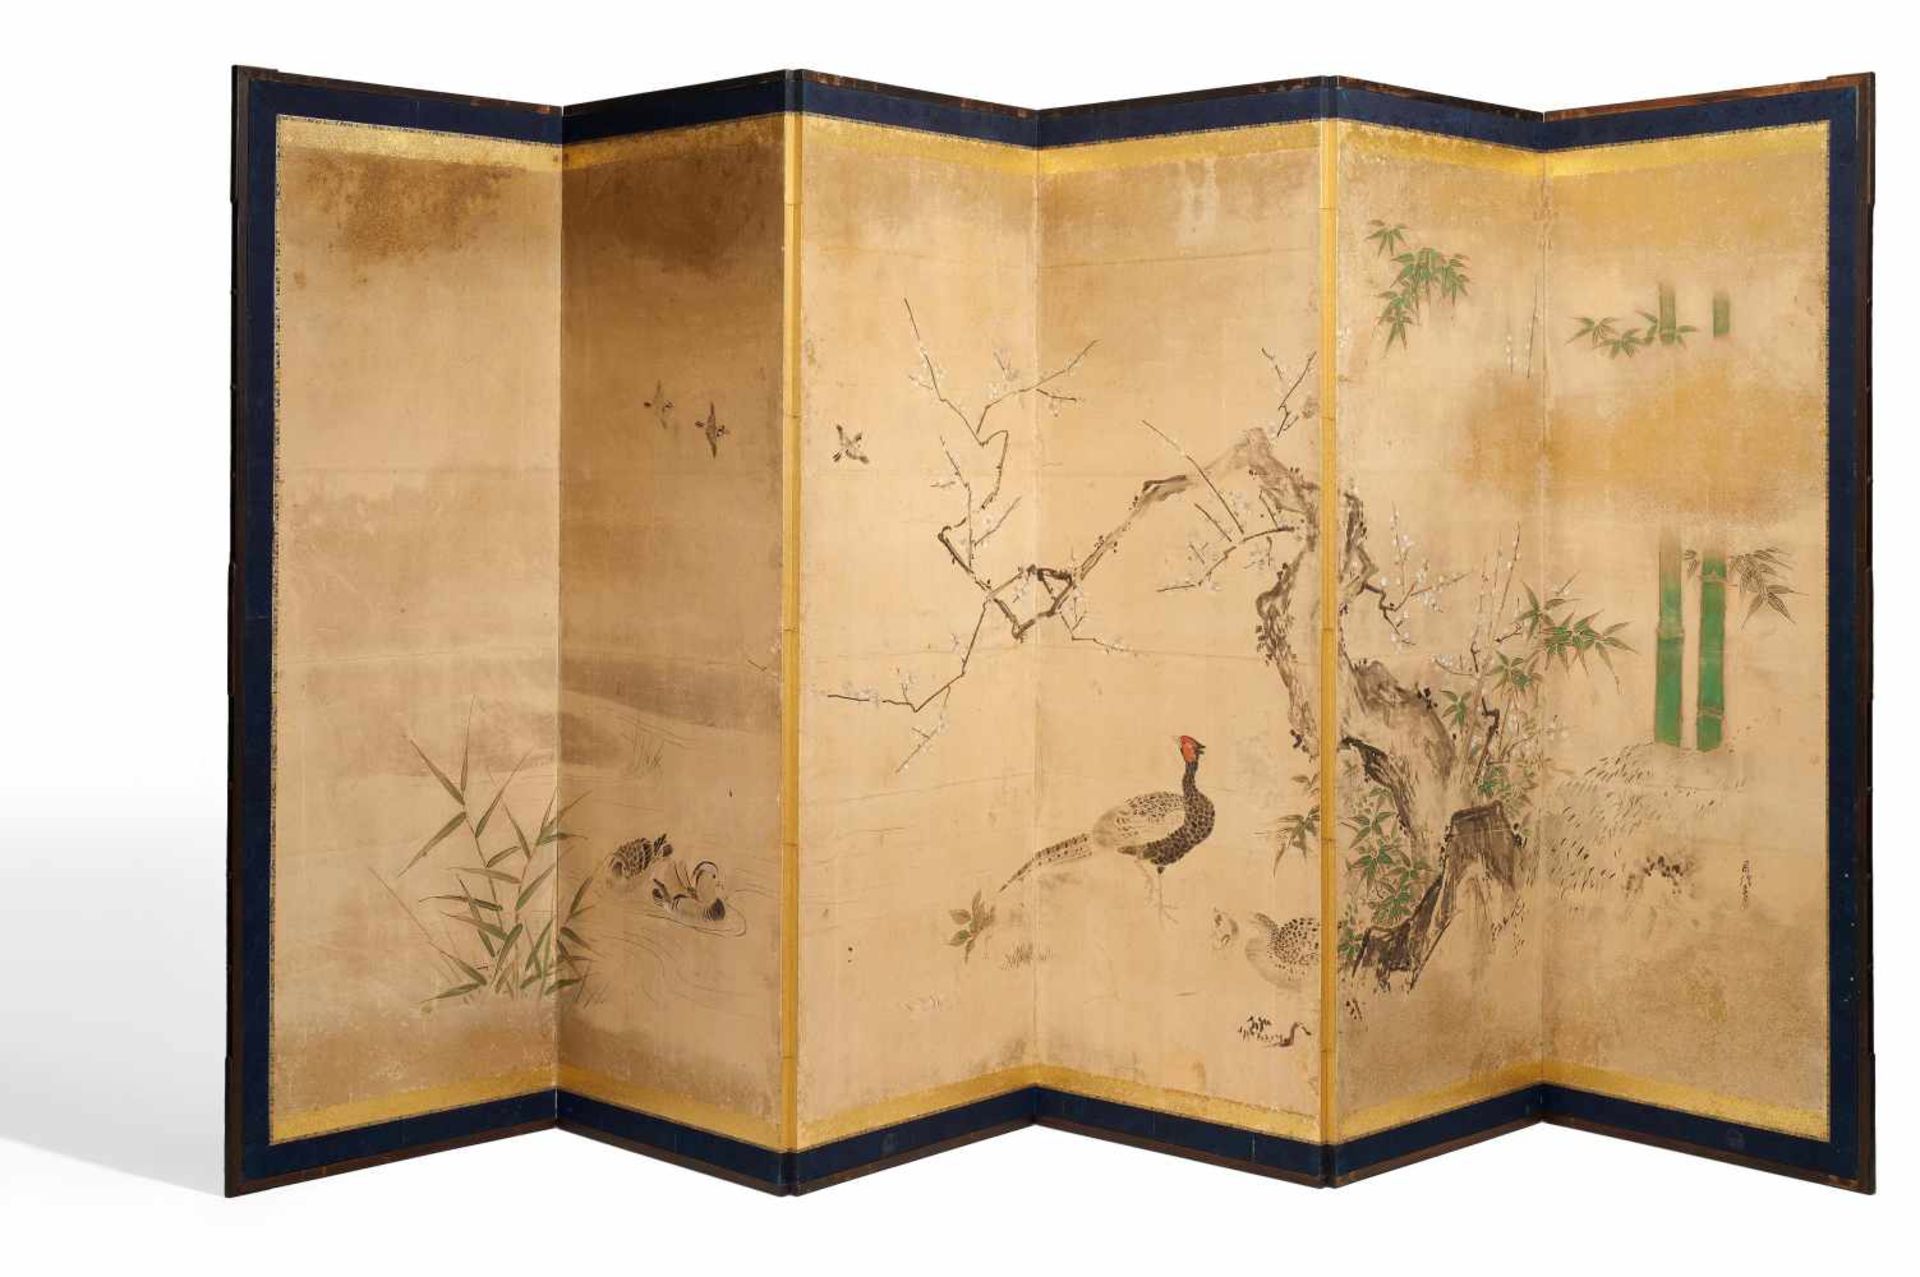 IMPORTANT SCREEN (BYÔBU) WITH BIRDS, PLUMS AND BAMBOO. Japan. Edo period (1603-1868). 17th/18th c.